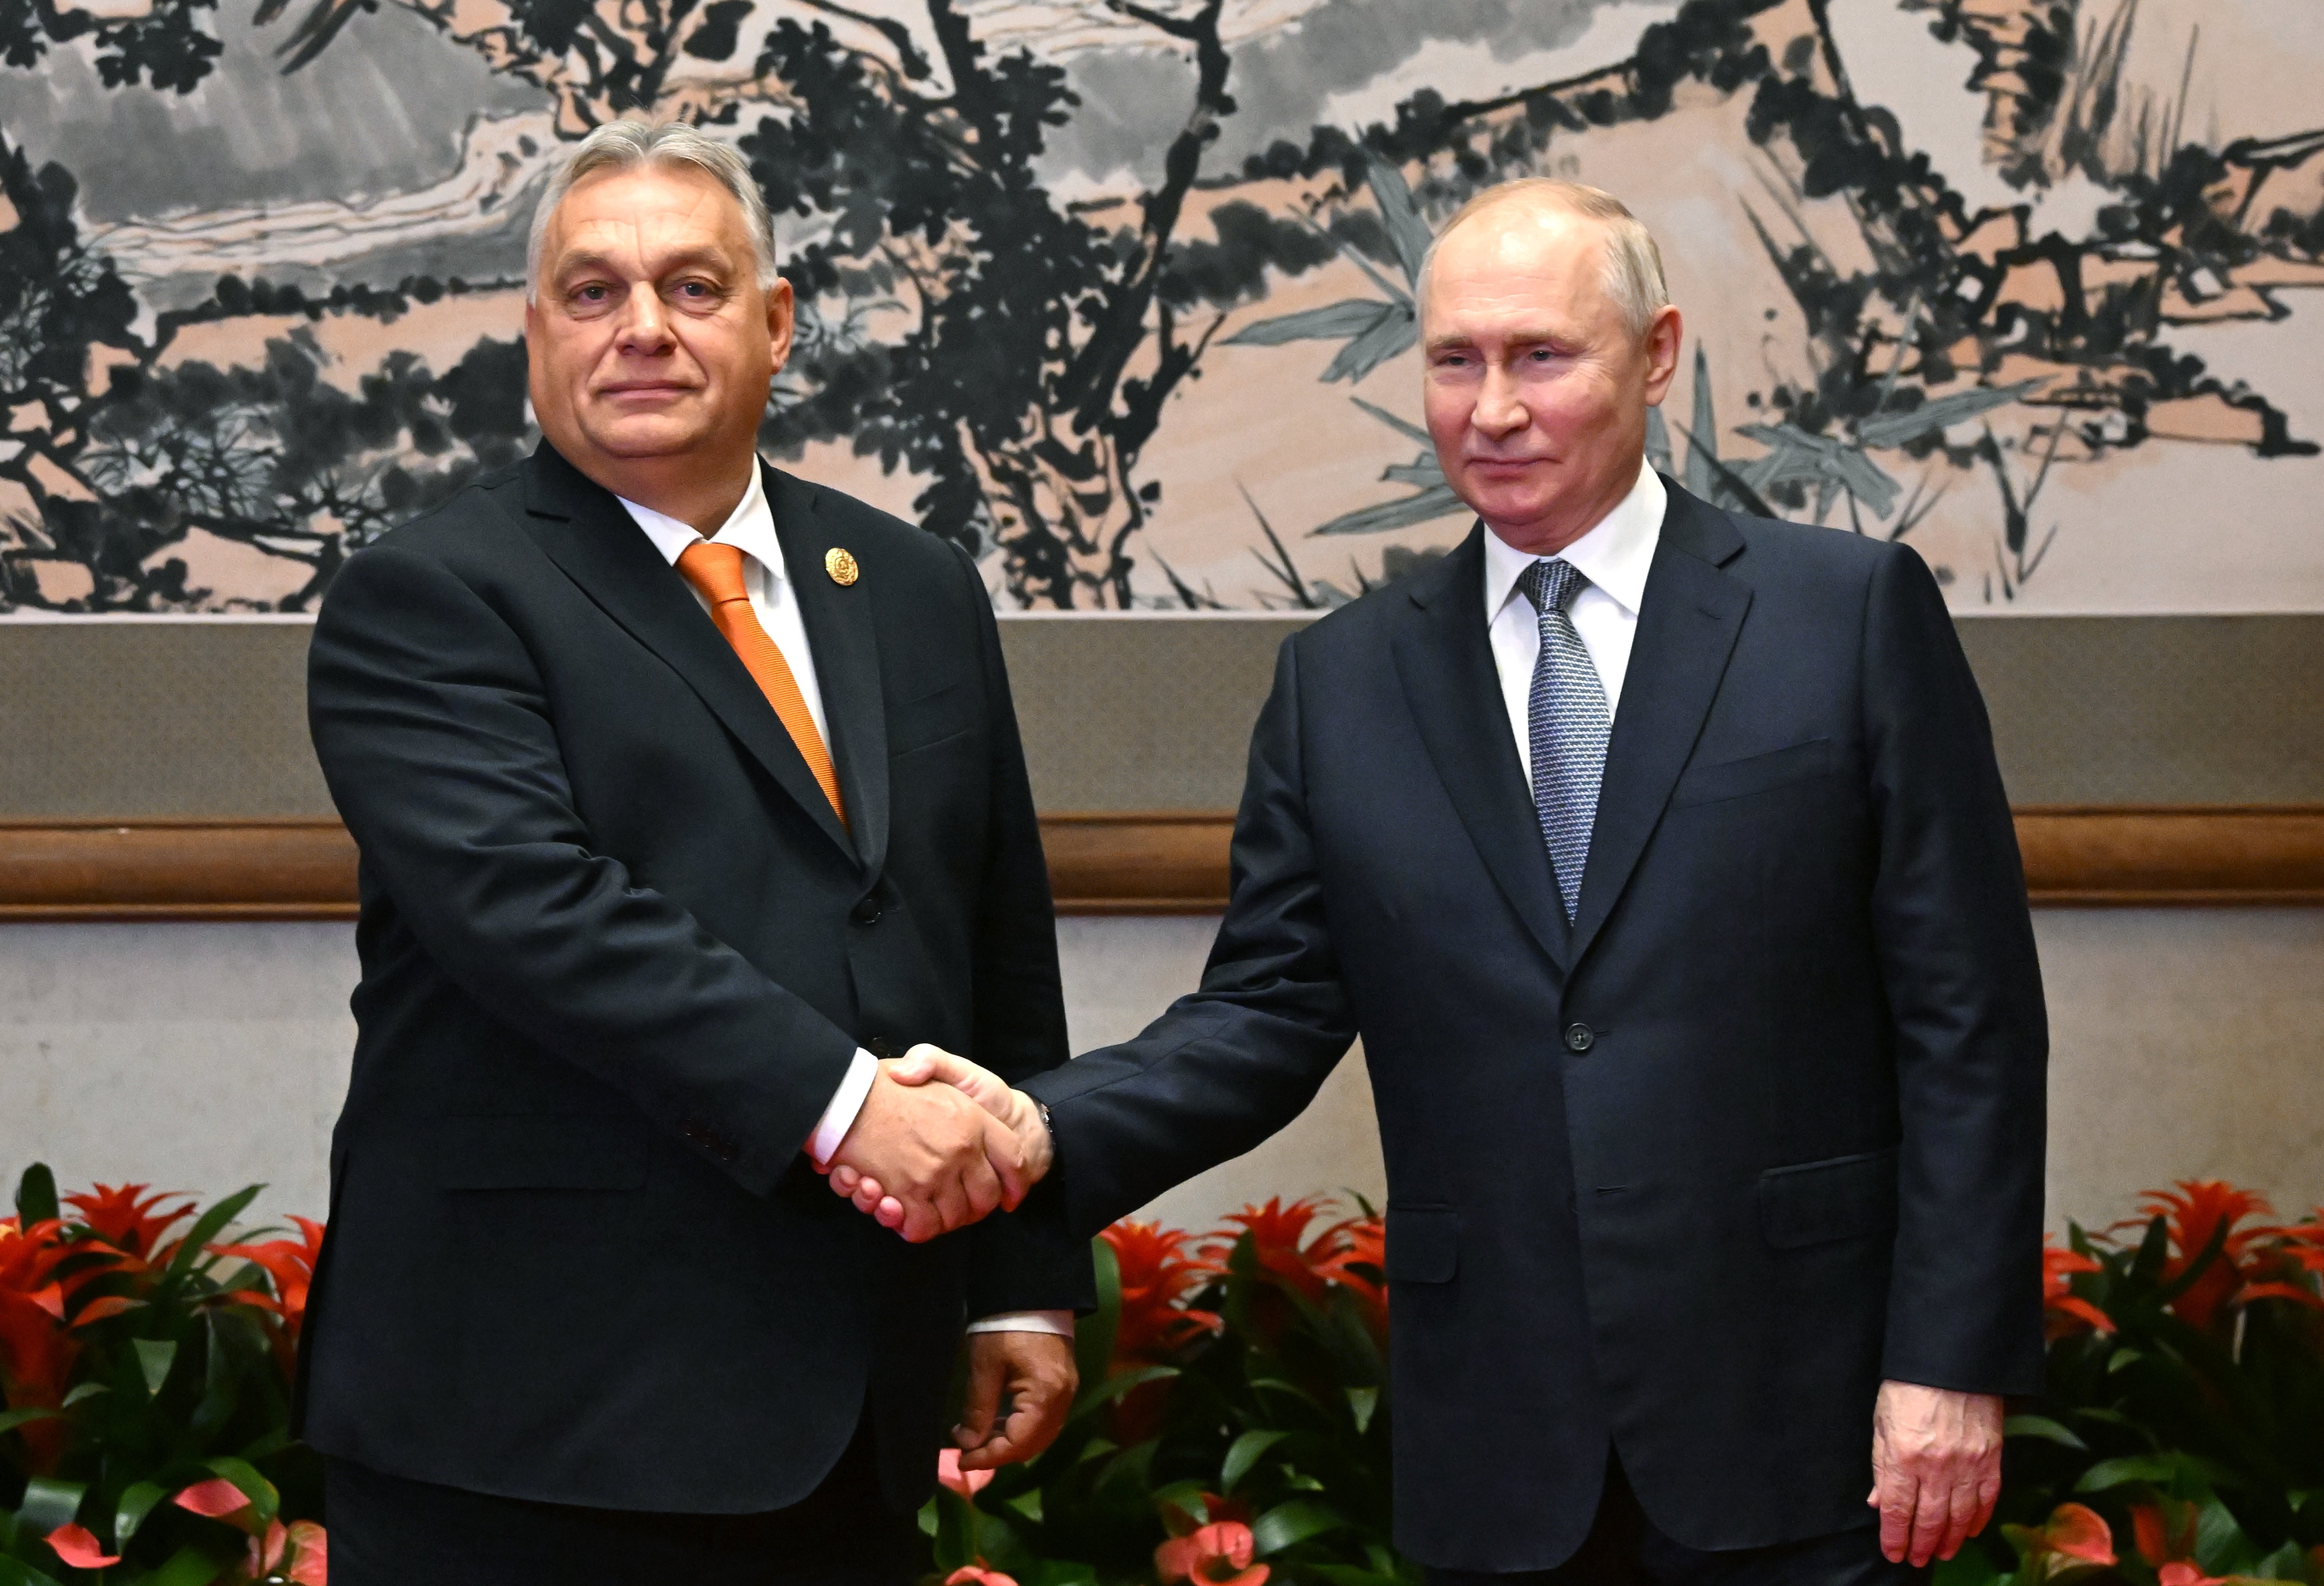 Hungary’s prime minister Viktor Orban shakes hands with Putin in Beijing, in defiance of EU opposition to Russia over the invasion of Ukraine